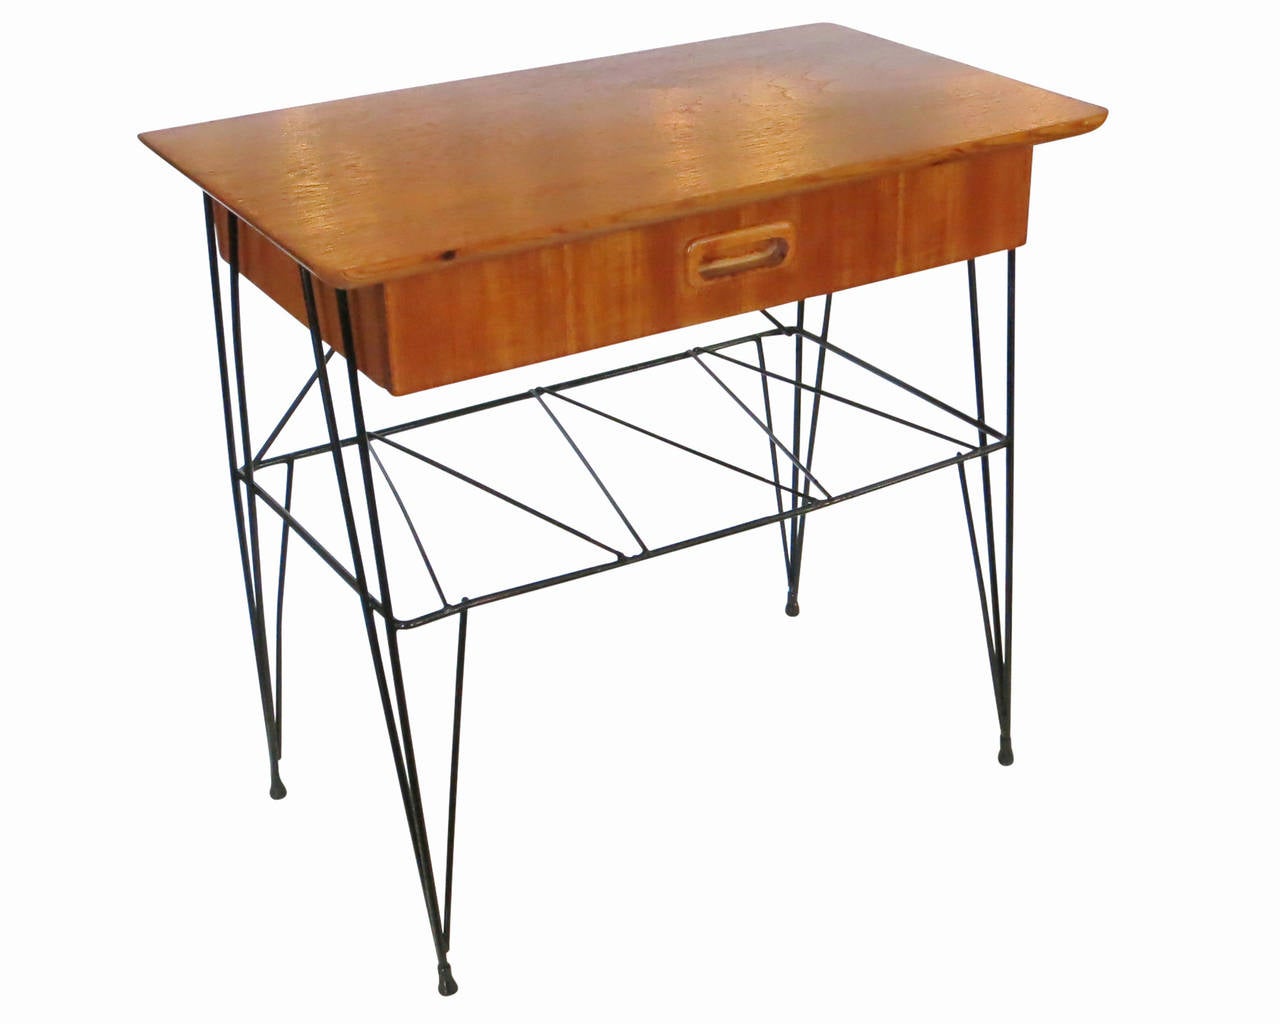 This Jean Royere style two tier sculptural table was made with a black painted wire frame table base and cherry stained oak top. The table comes with a single pull out drawer with sculpted drawer pull and wire platform for extra storage.